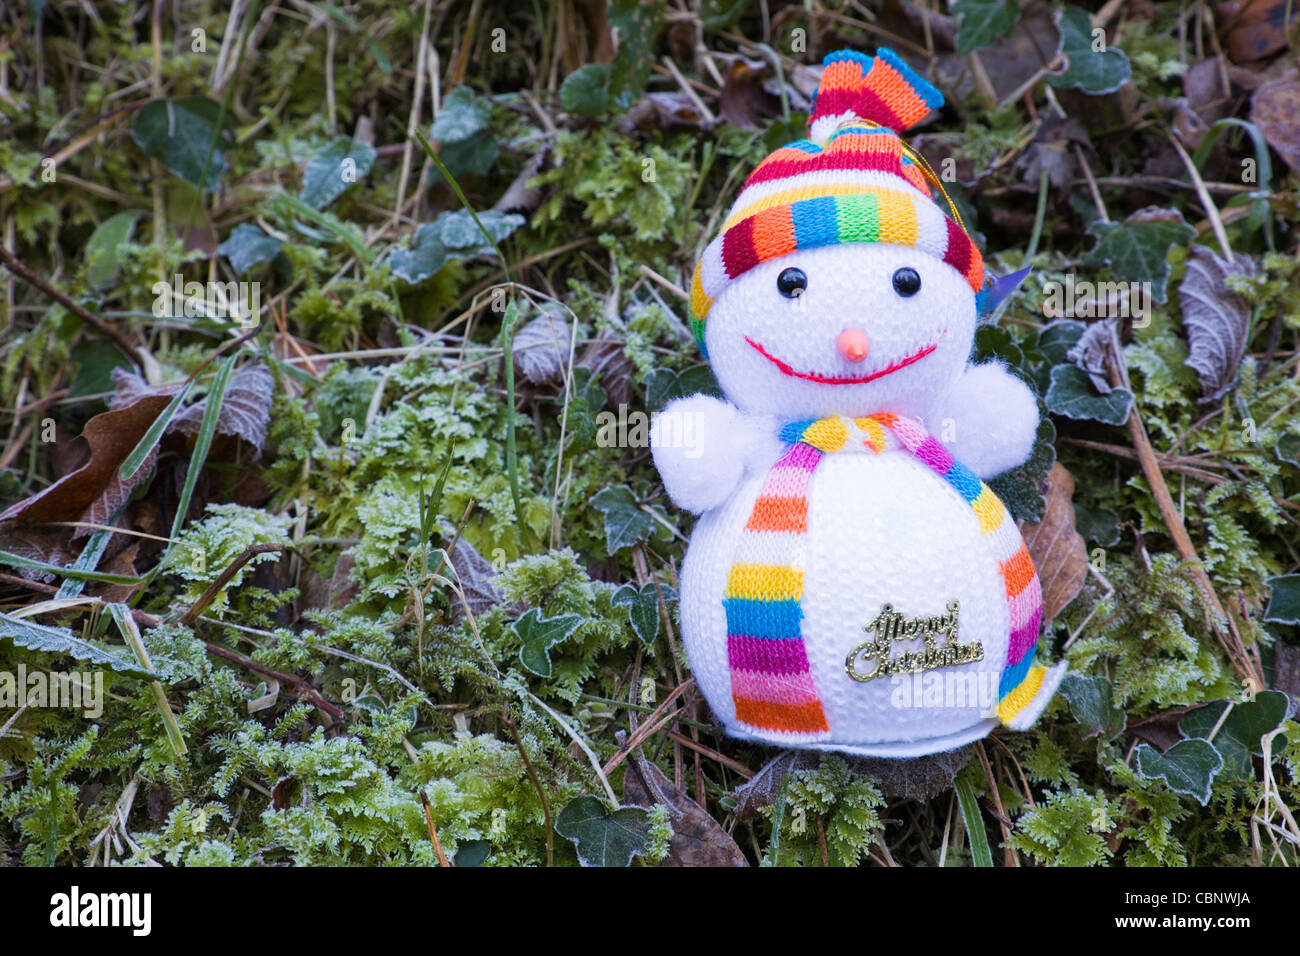 Toy snowman with frozen vegetation as a background showing the message 'Merry Christmas' Stock Photo